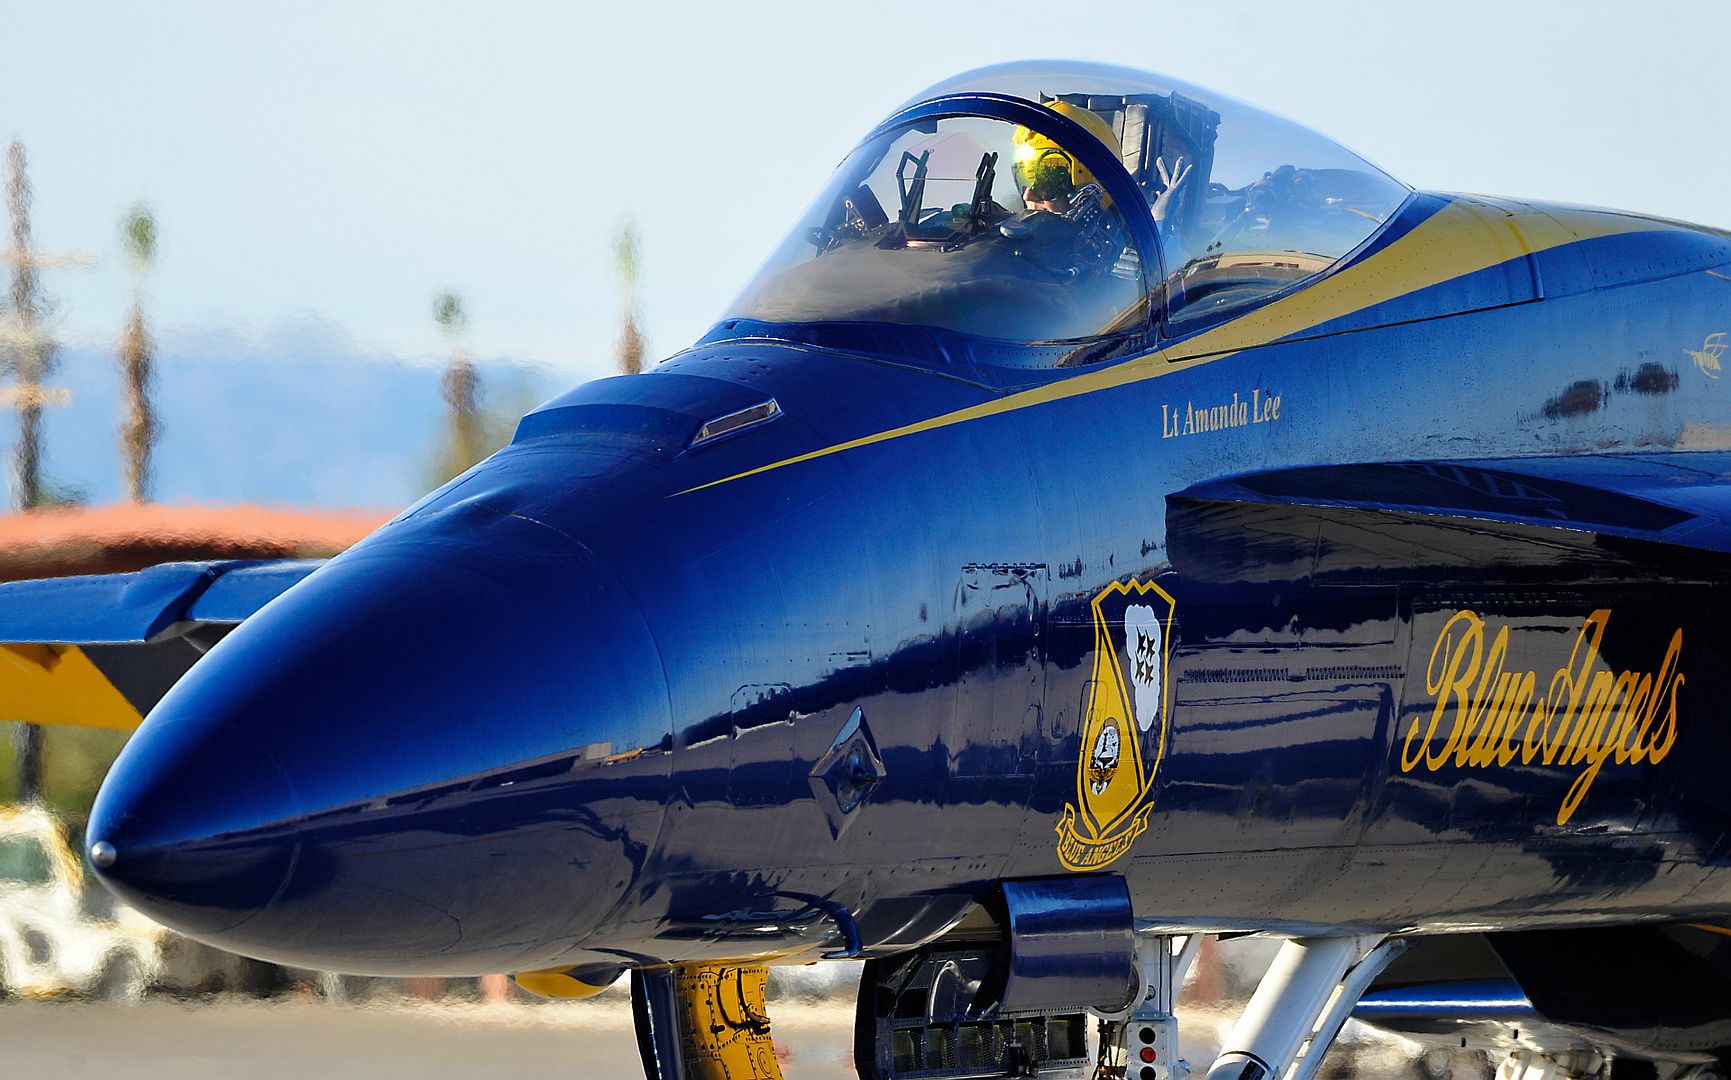 Blue Angels Are Currently Conducting Winter Training At NAF El Centro California In Preparation For The Upcoming 2023 Air Show Season